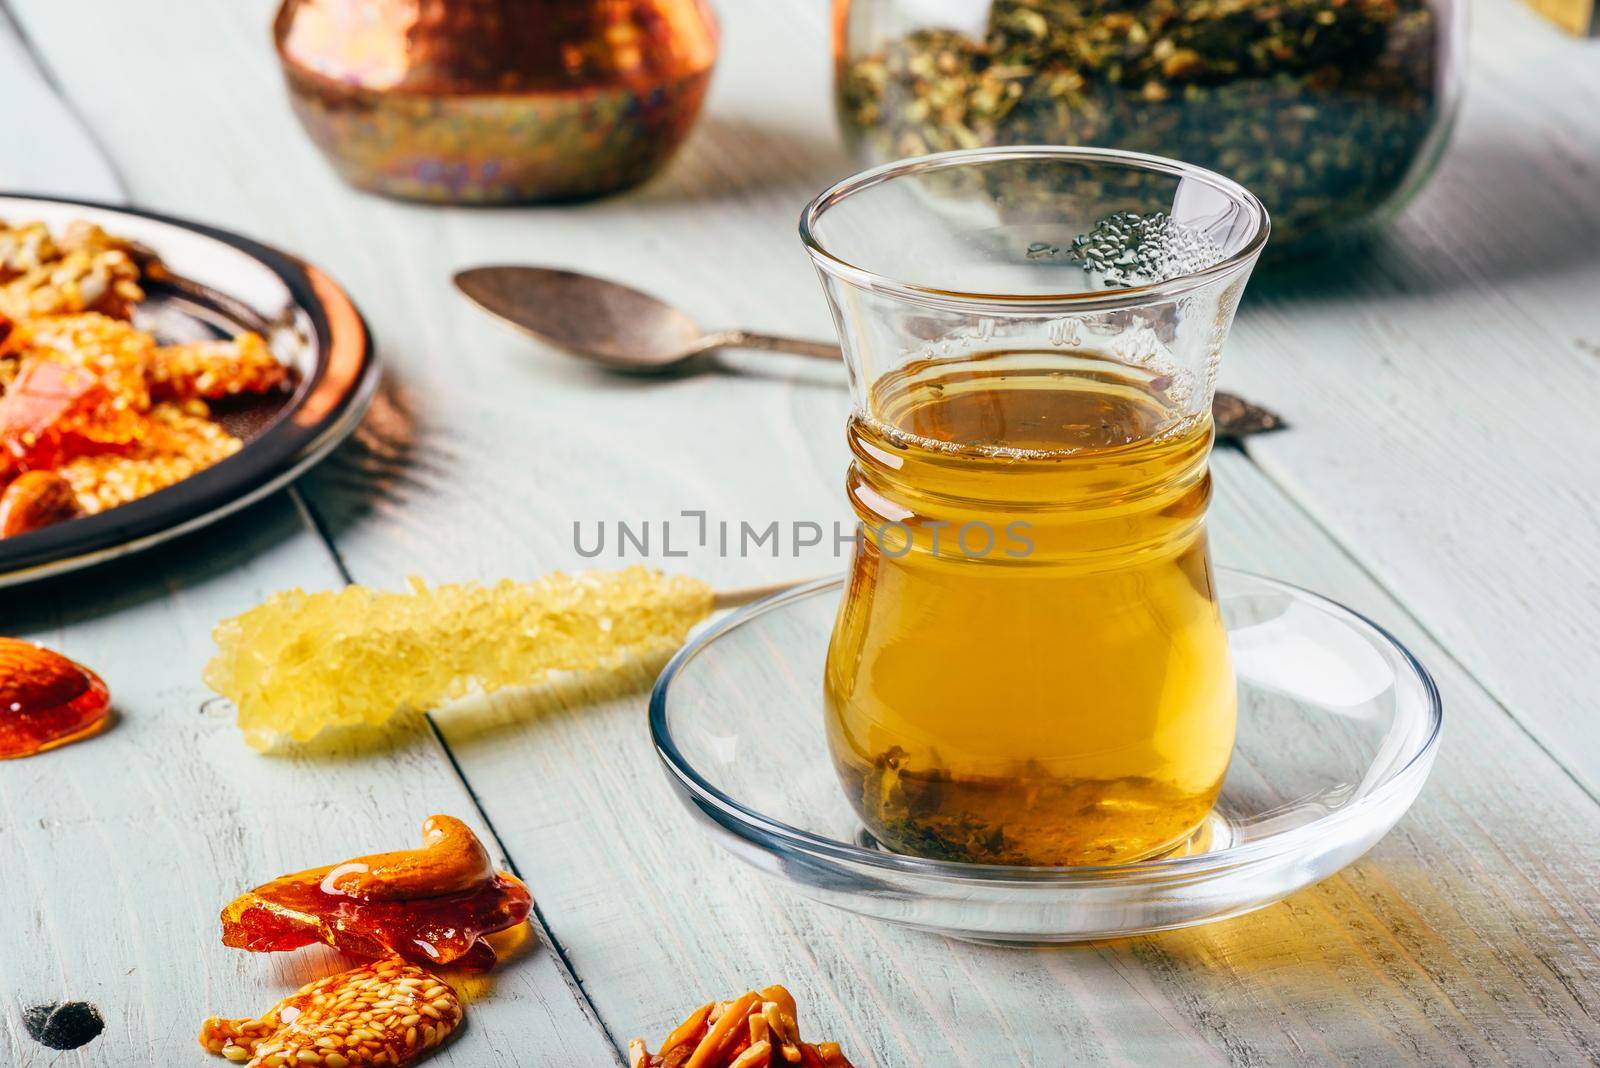 Herbal tea in oriental glass with arabian nut delights on metal plate over light wooden surface